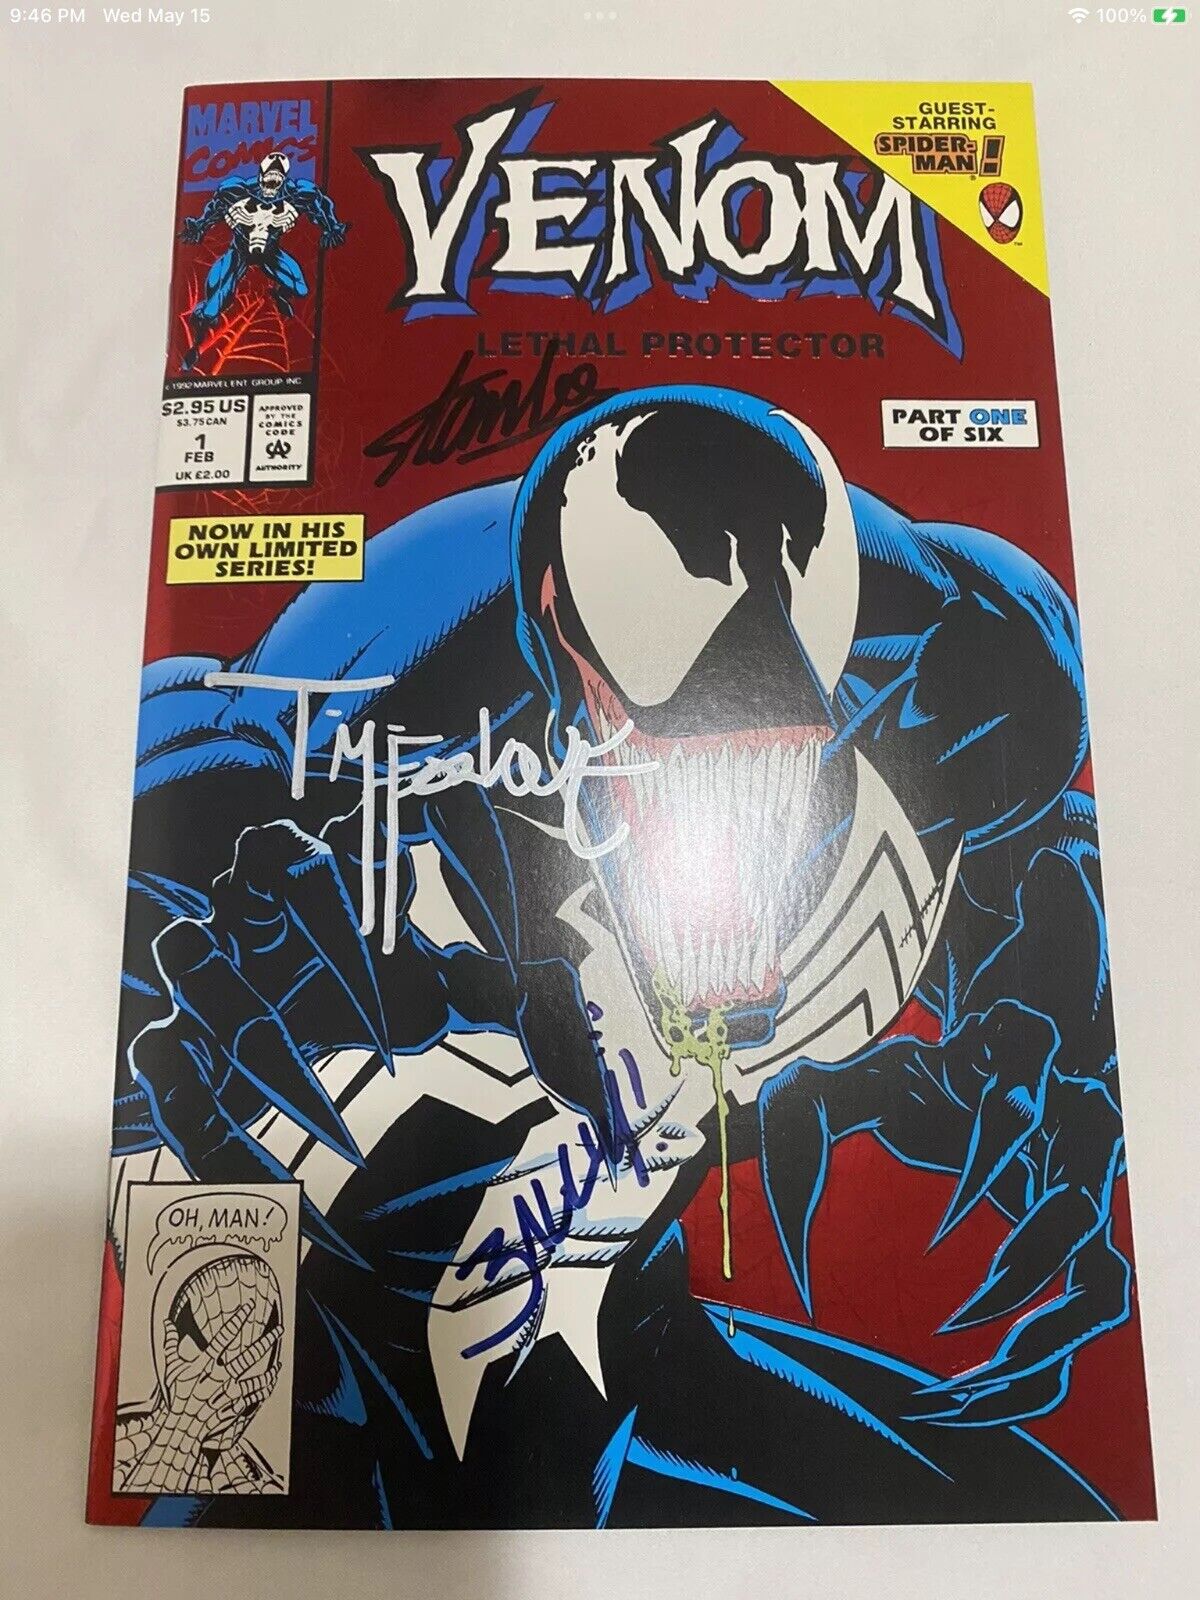 VENOM: LETHAL PROTECTOR 1 SIGNED 3X BY STAN LEE, TODD MCFARLANE, MARK BAGLEY NM+